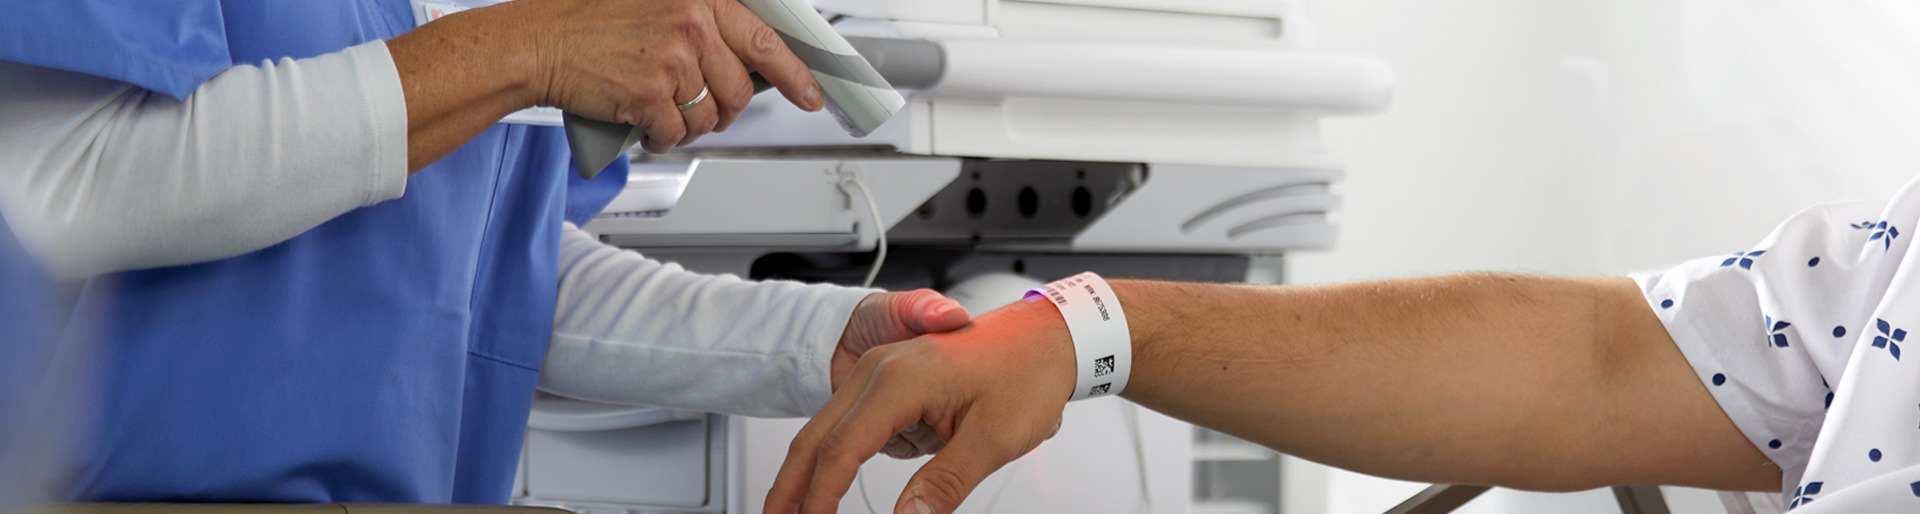 Patient ID wristband being scanned